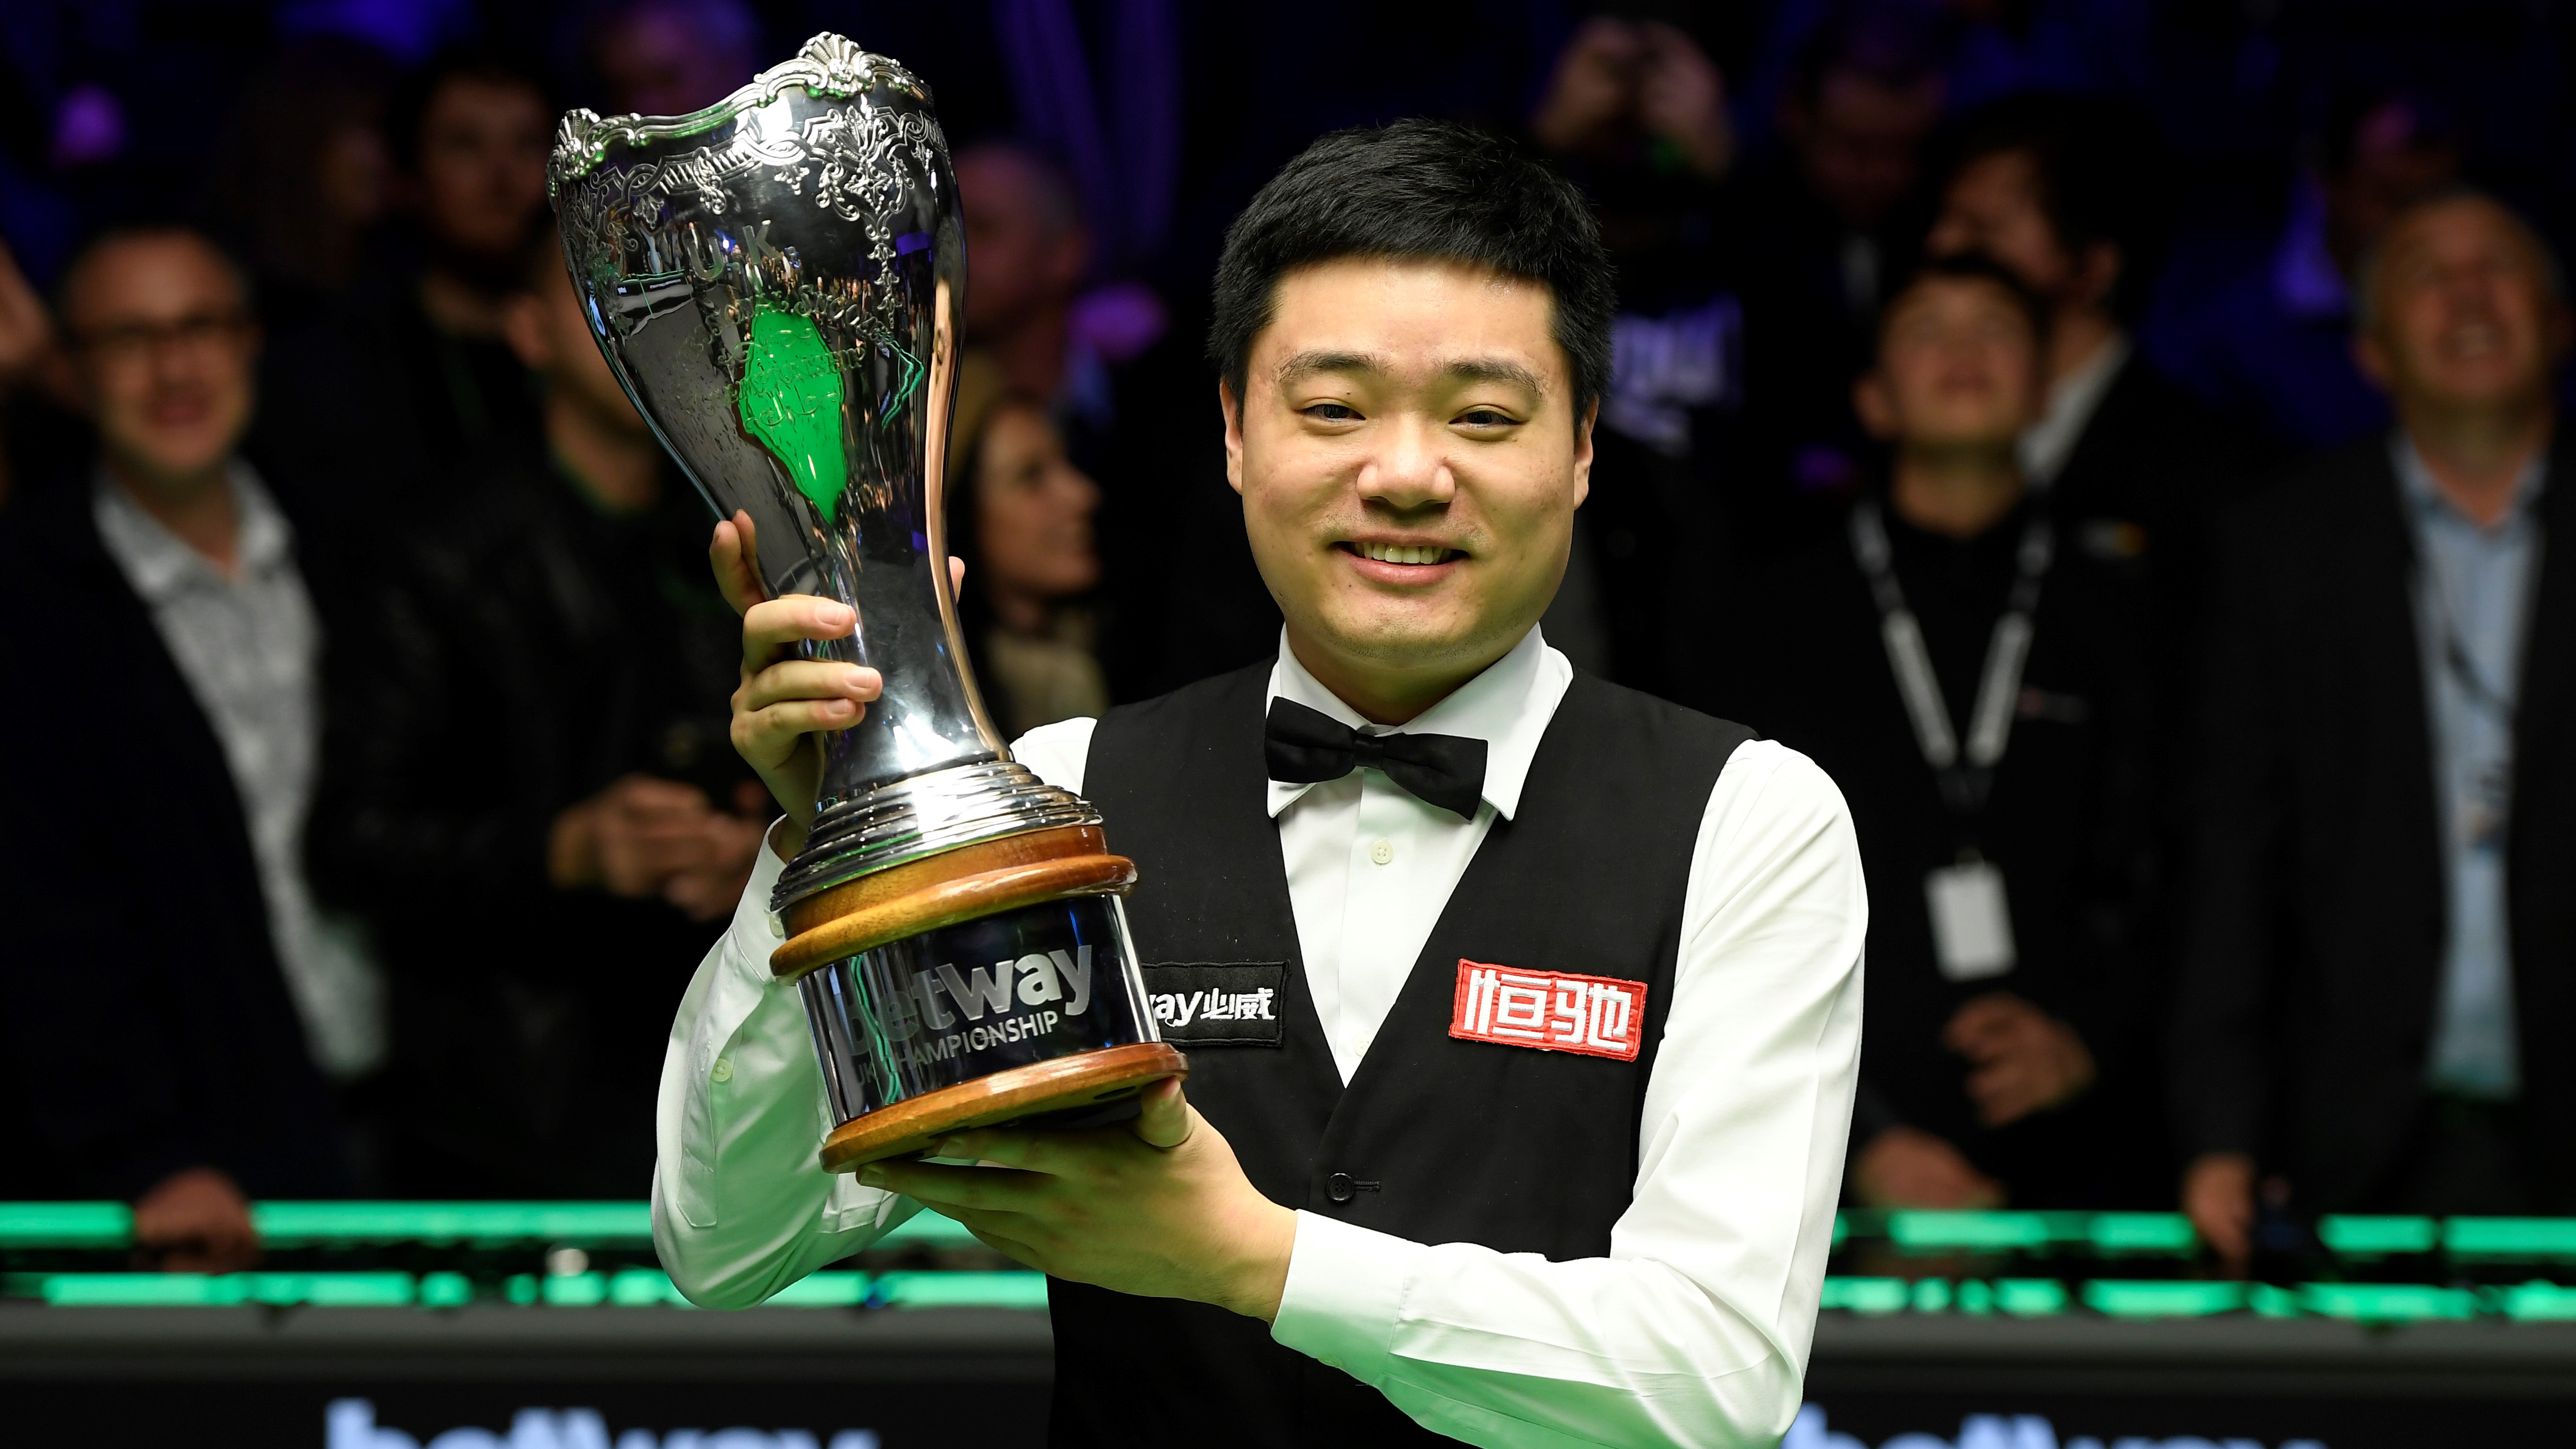 UK Snooker Championship live stream 2020 how to watch every shot from anywhere today TechRadar